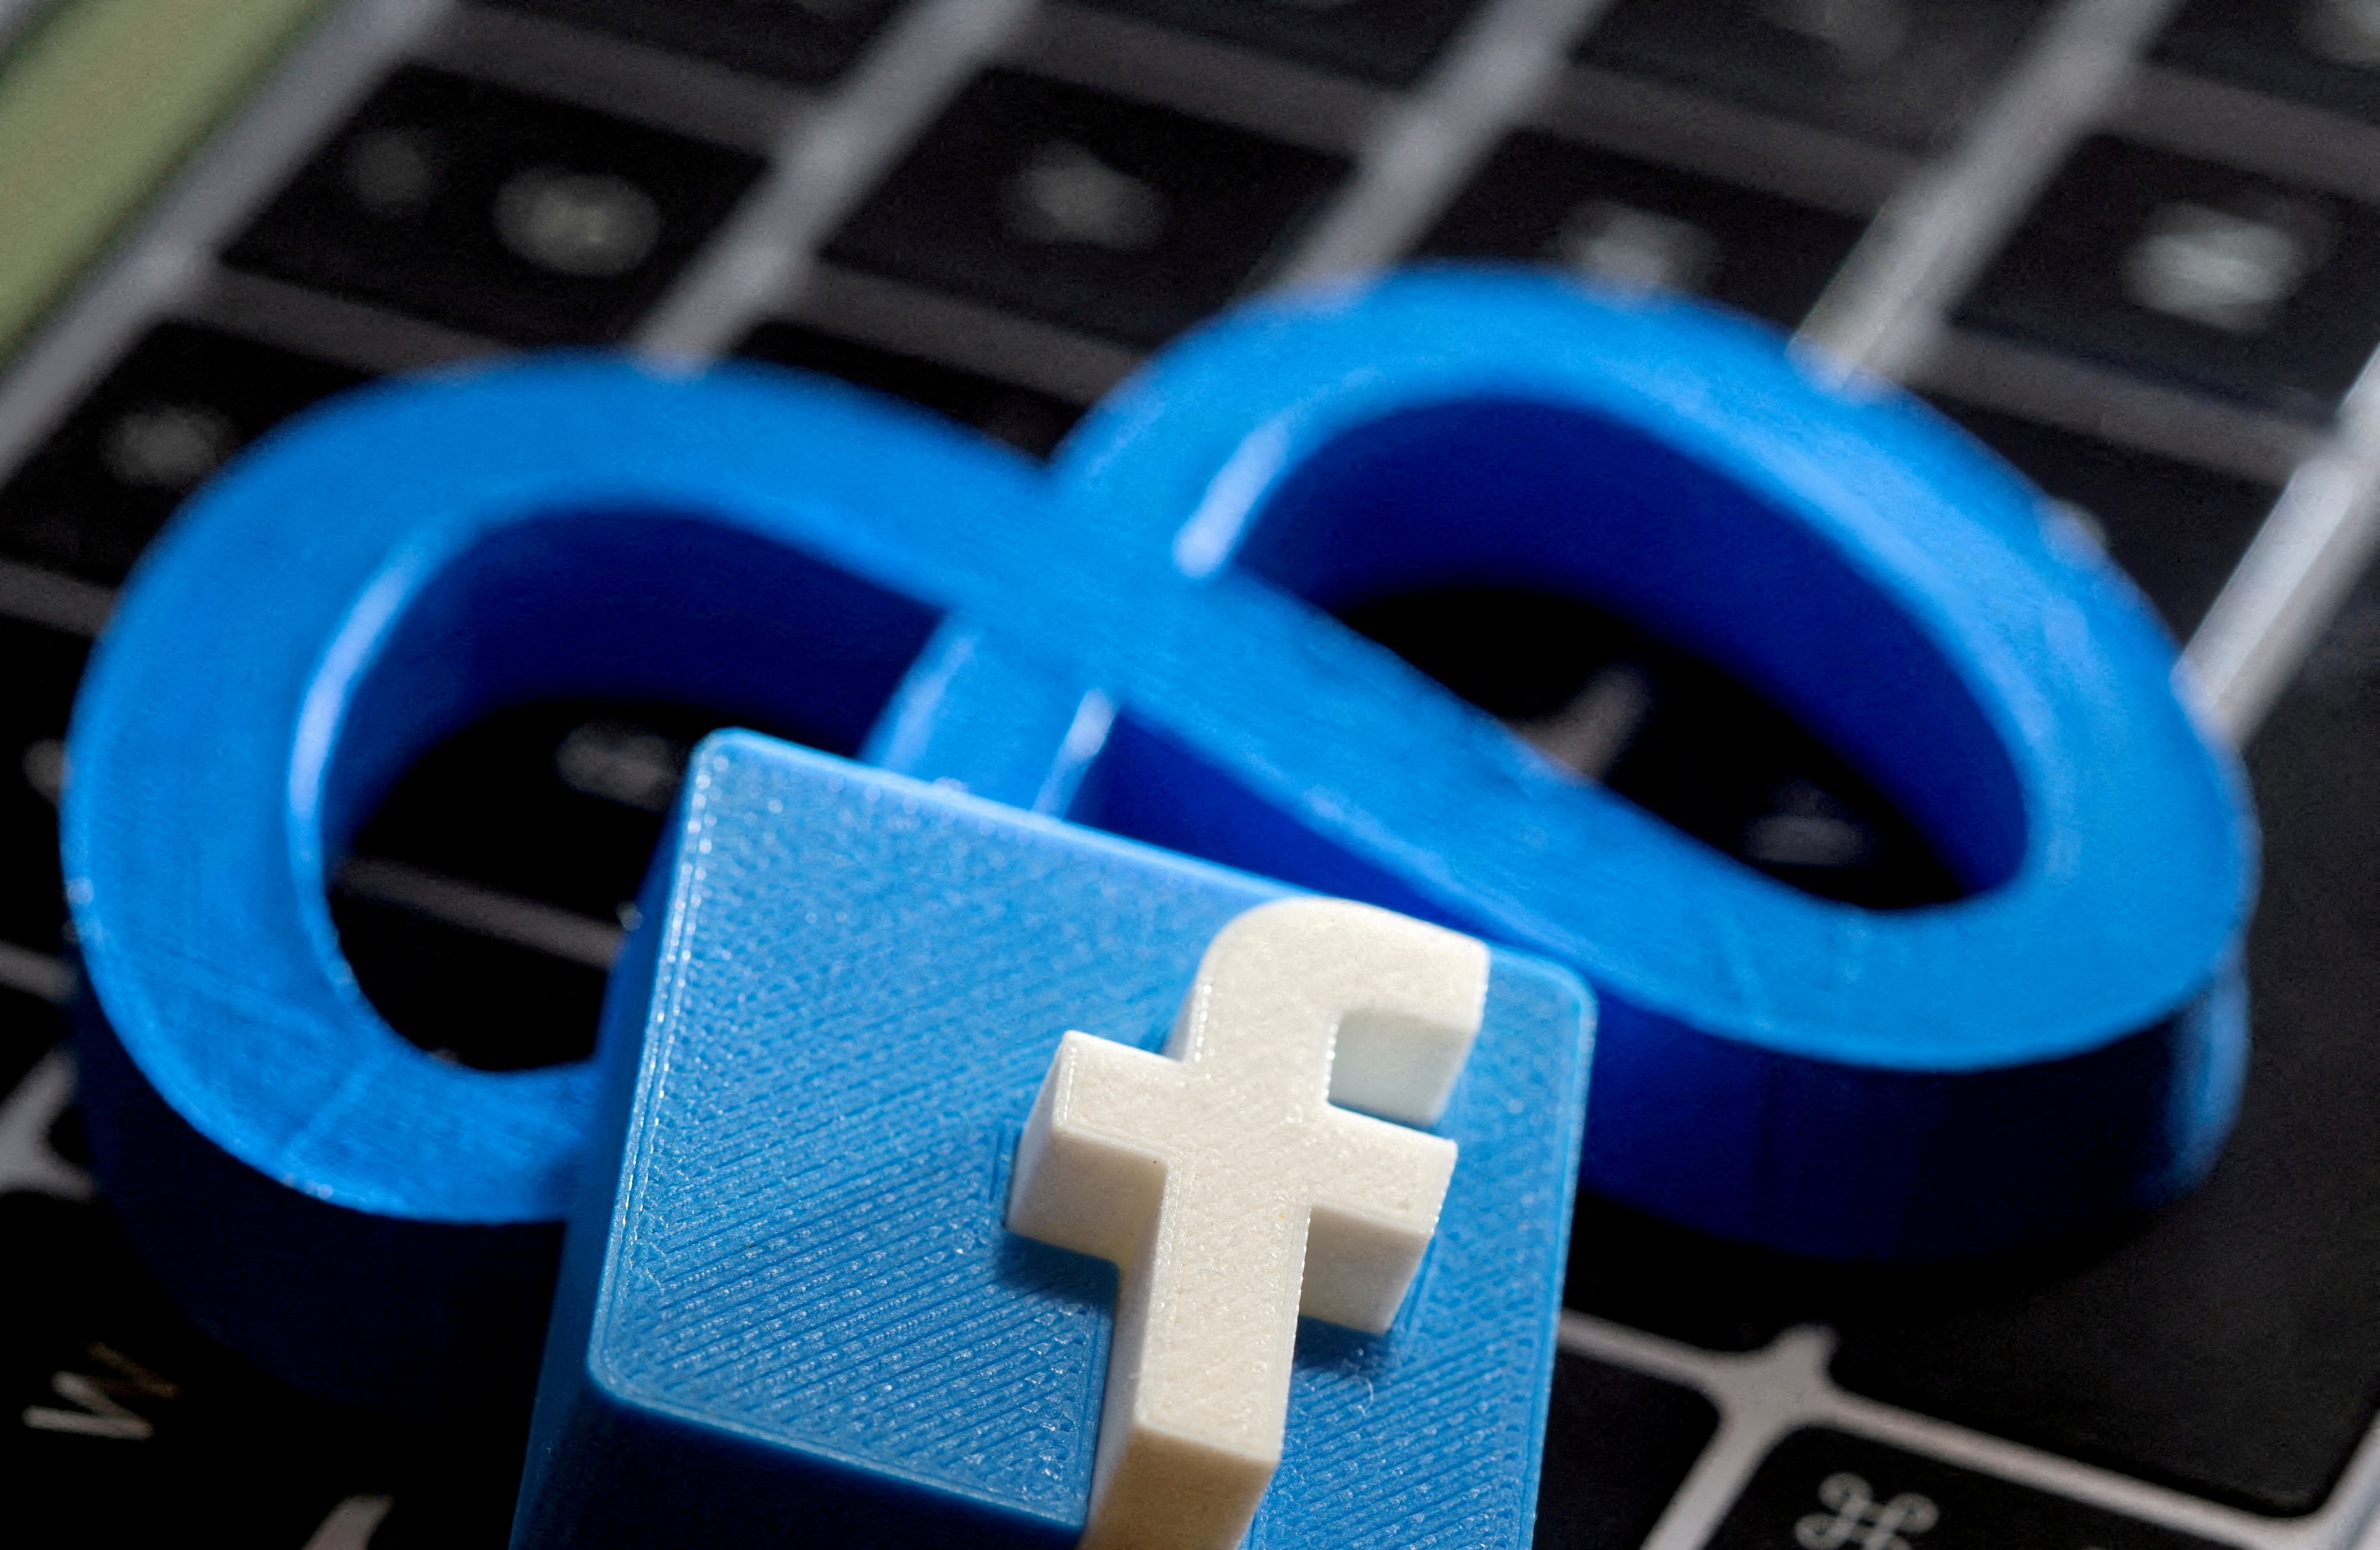 3D-printed images of the logos of Facebook and parent company Meta Platforms are seen on a laptop keyboard in this illustration